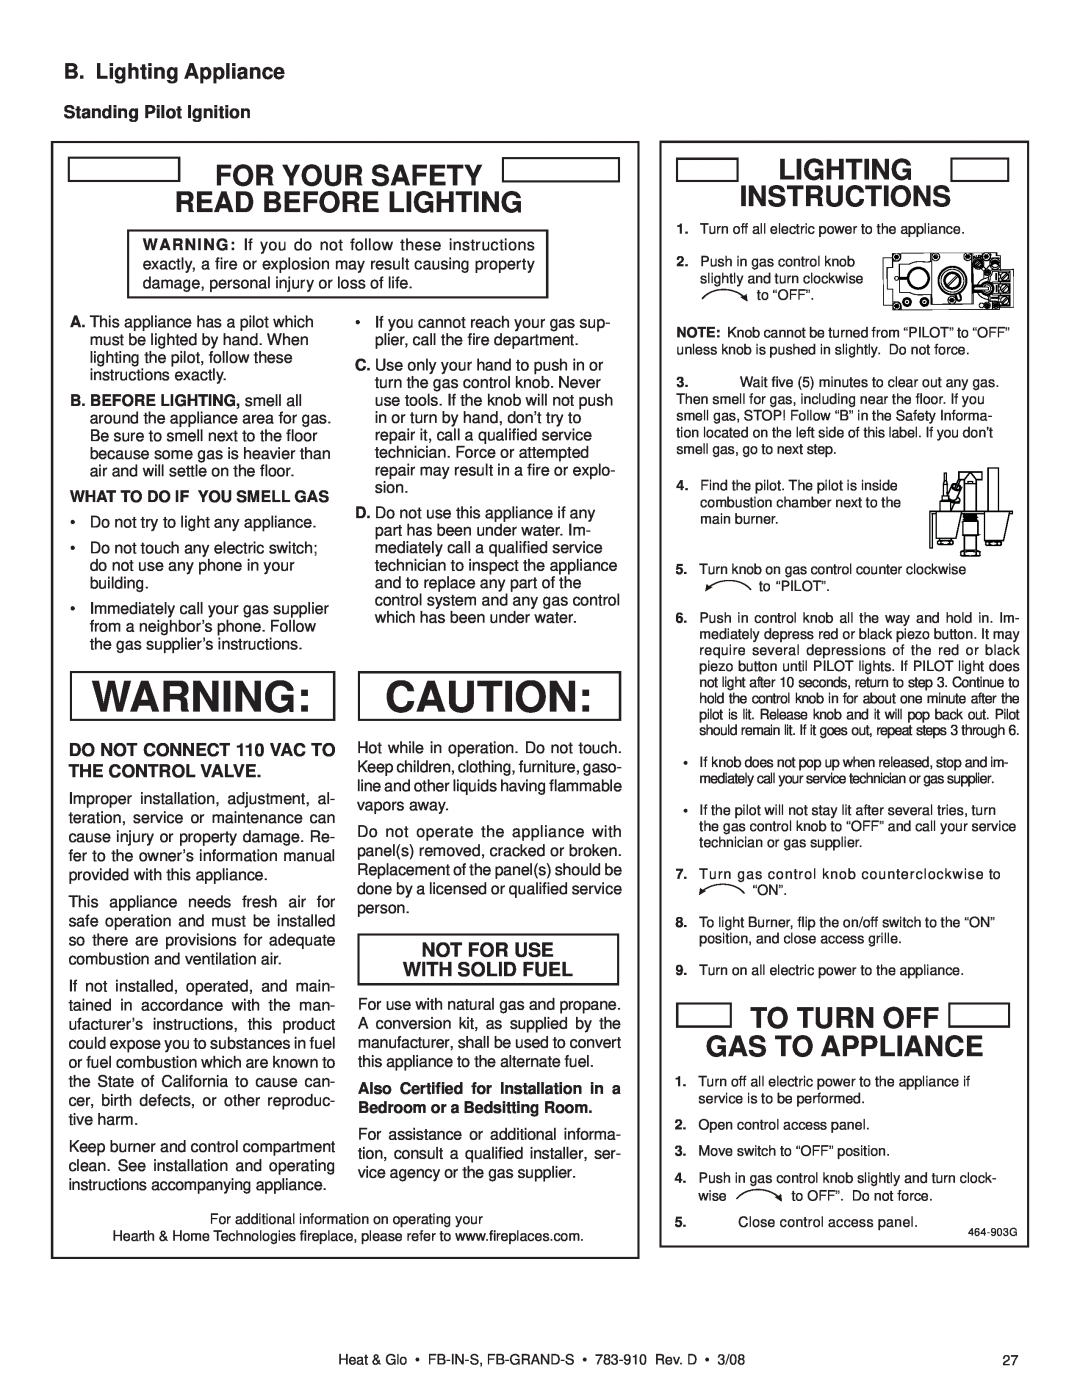 Heat & Glo LifeStyle FB-IN-S For Your Safety Read Before Lighting, Lighting Instructions, To Turn Off Gas To Appliance 